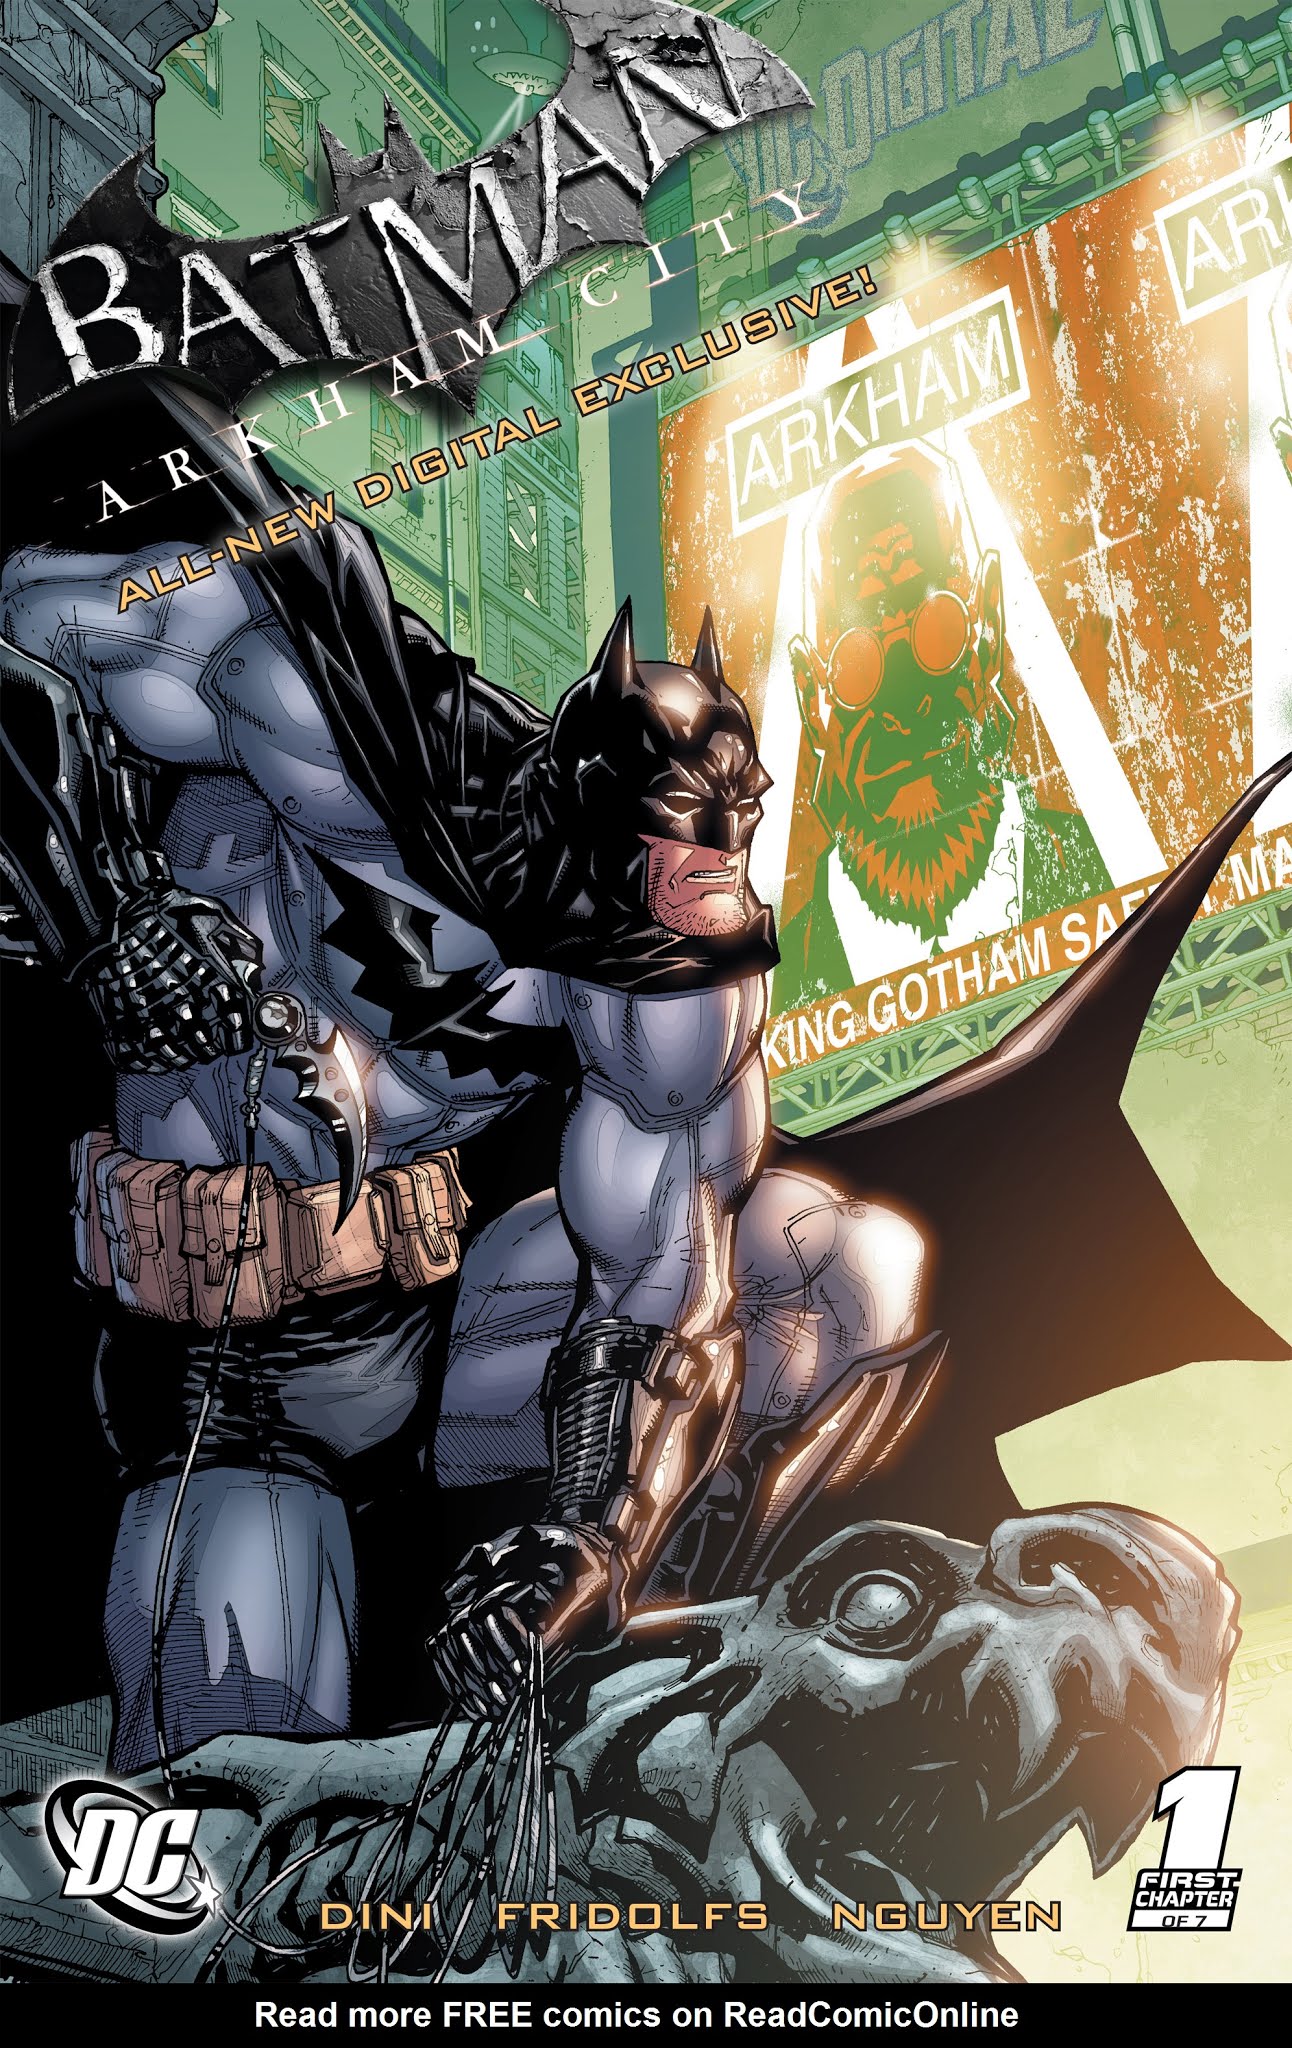 Batman Arkham City Digital Chapter Issue 1 | Read Batman Arkham City  Digital Chapter Issue 1 comic online in high quality. Read Full Comic online  for free - Read comics online in